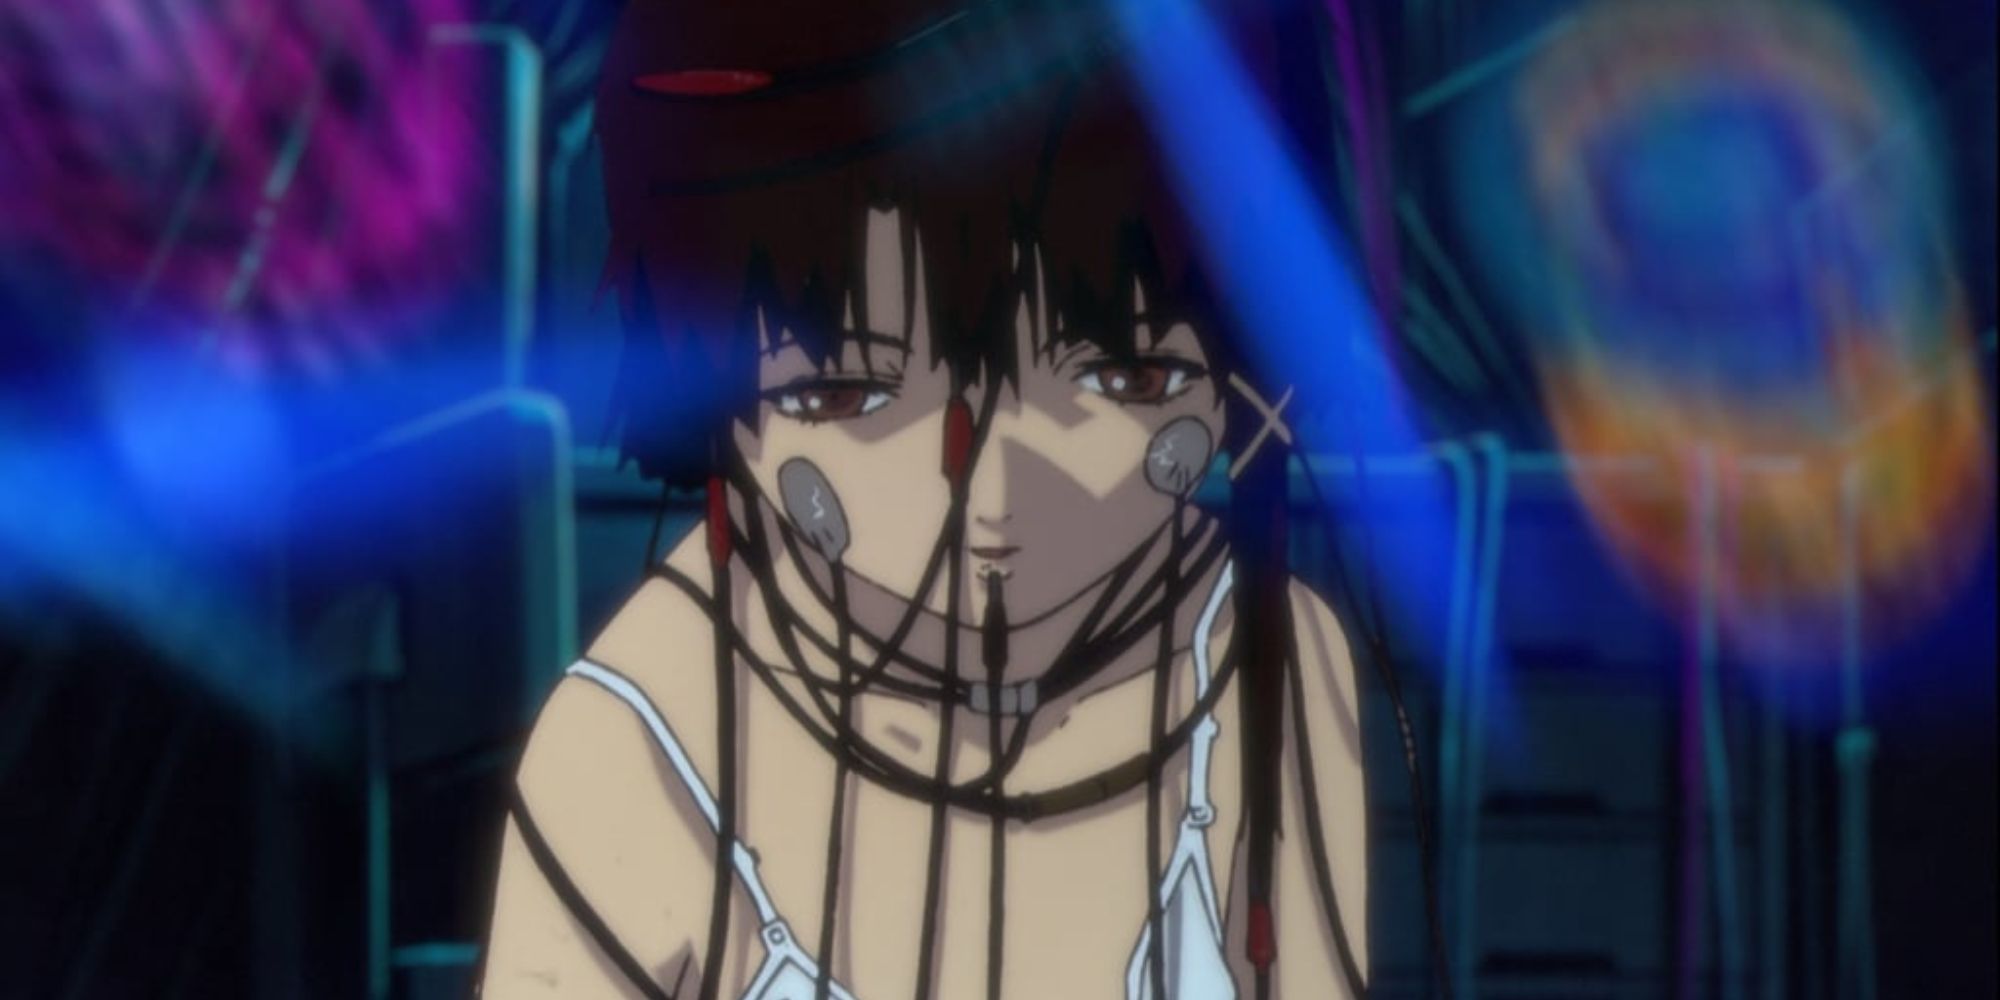 Serial experiments Lain character